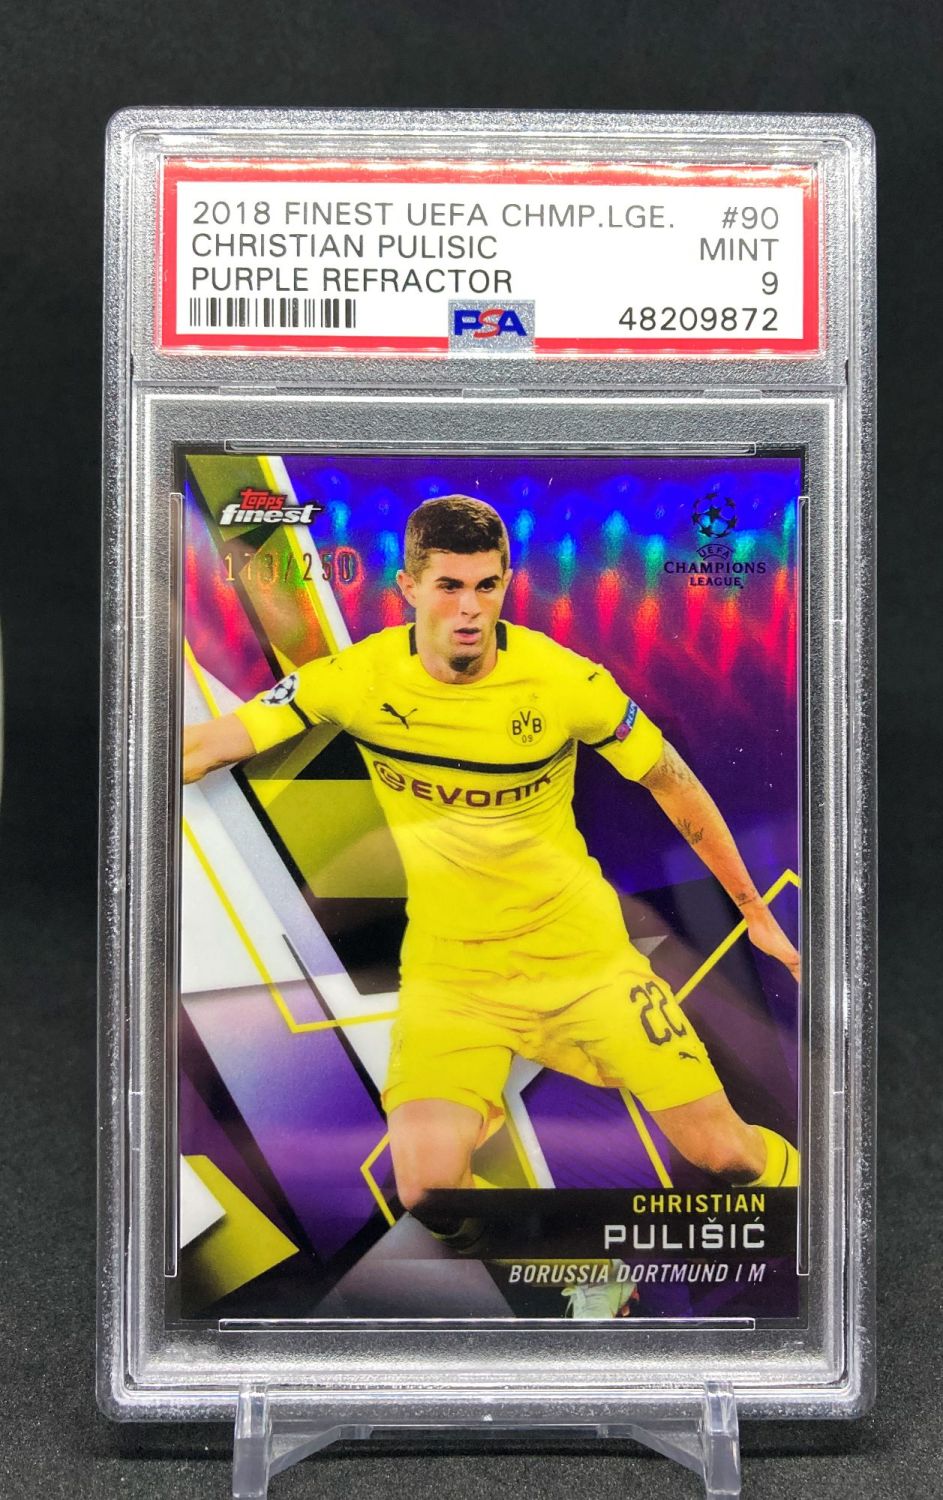 2018-19 Topps Finest Champions League CHRISTIAN PULISIC Purple Refractor /2